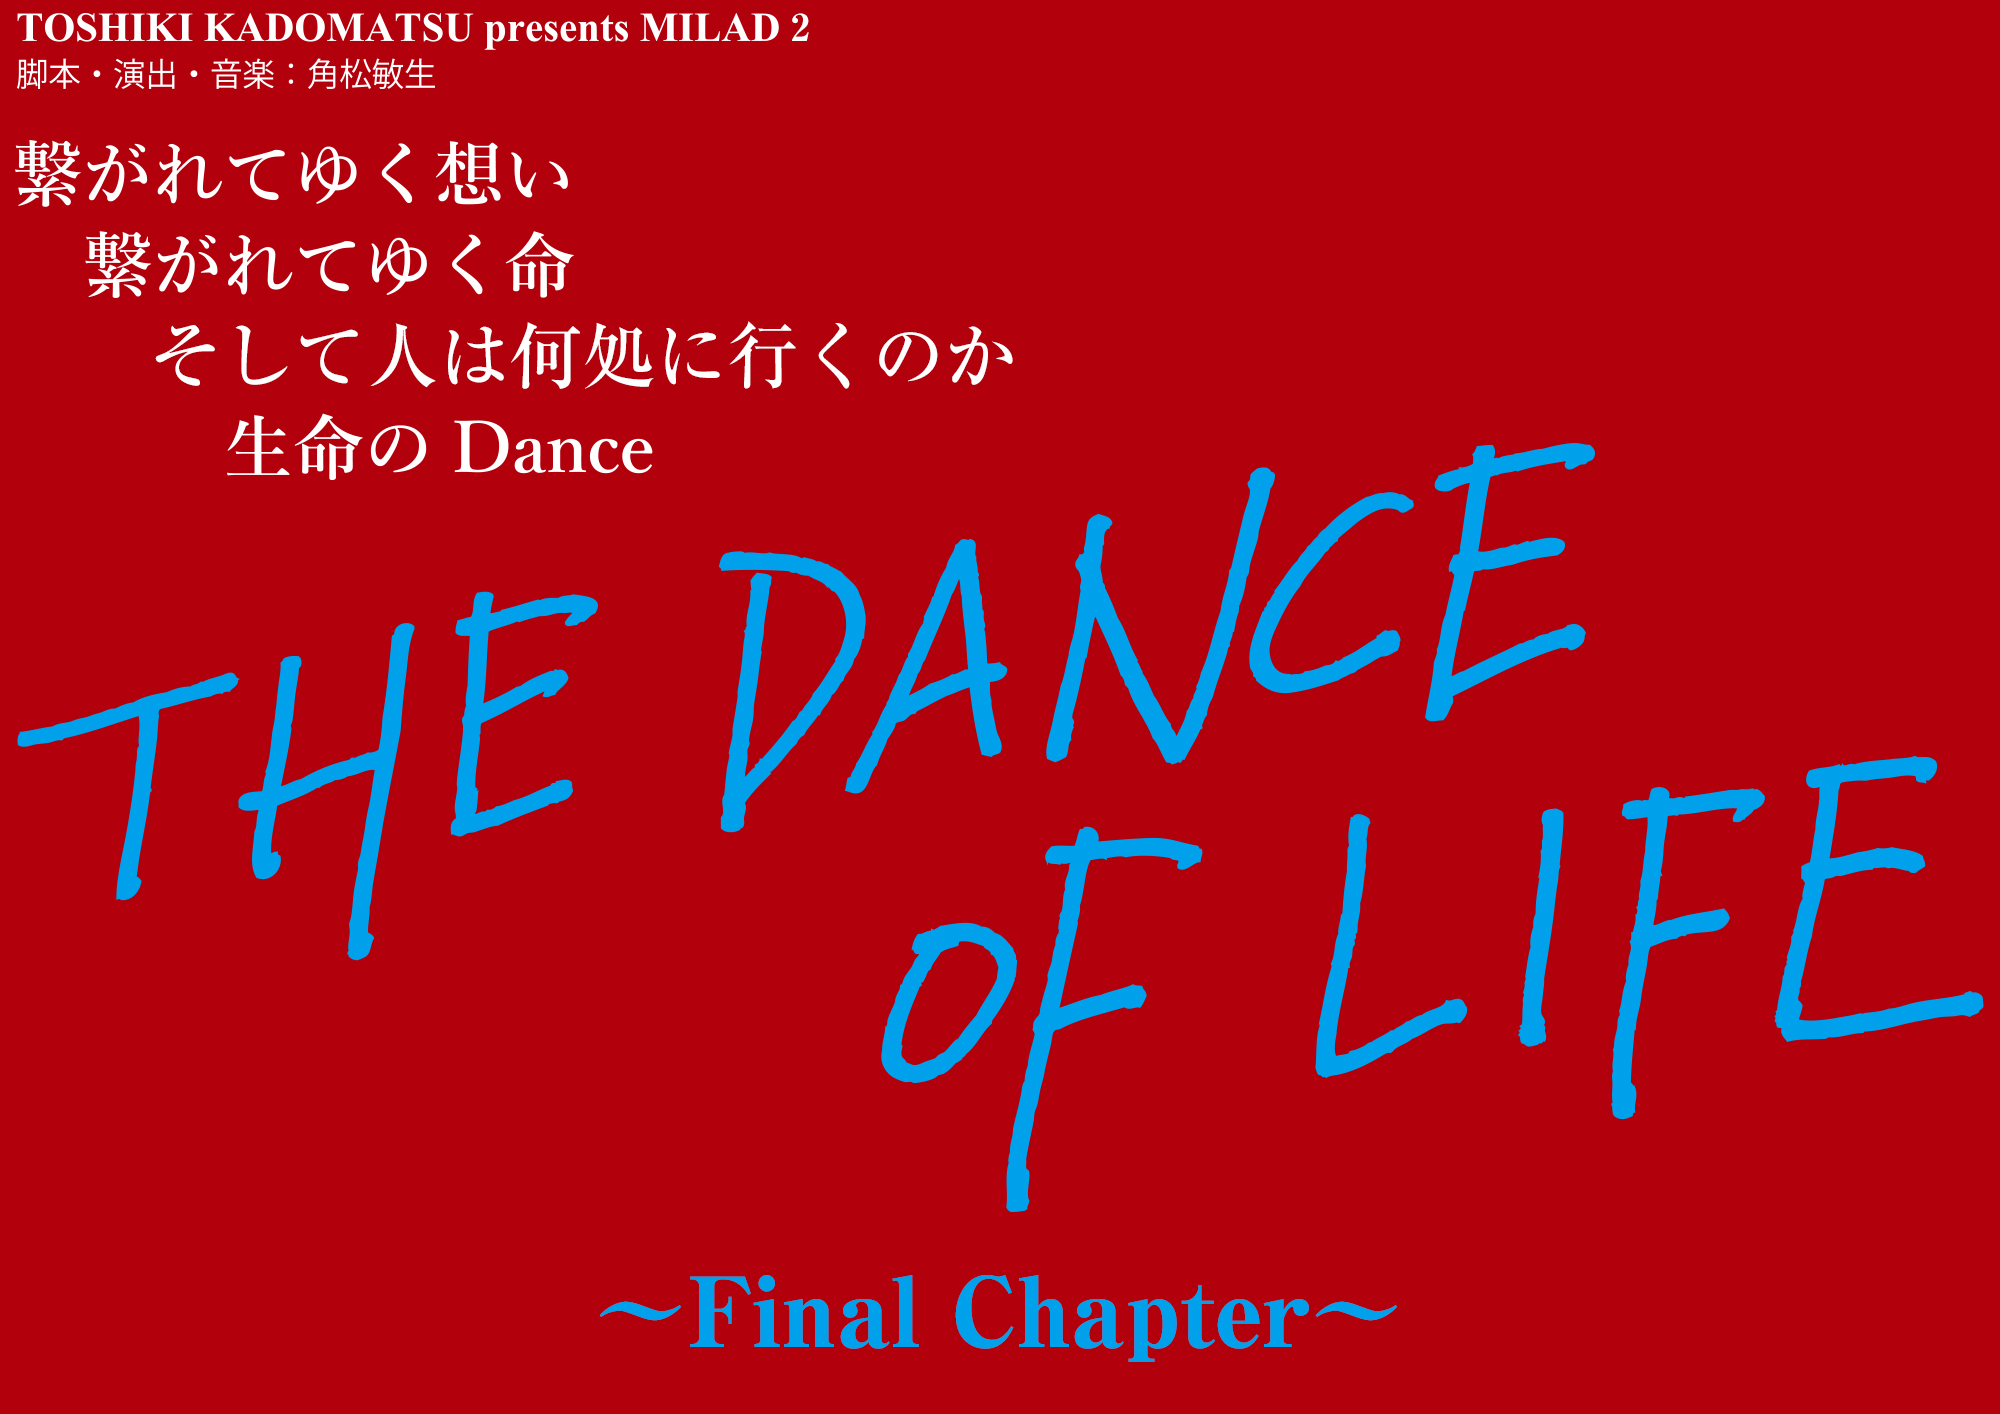 「THE DANCE OF LIFE ～Final Chapter～」